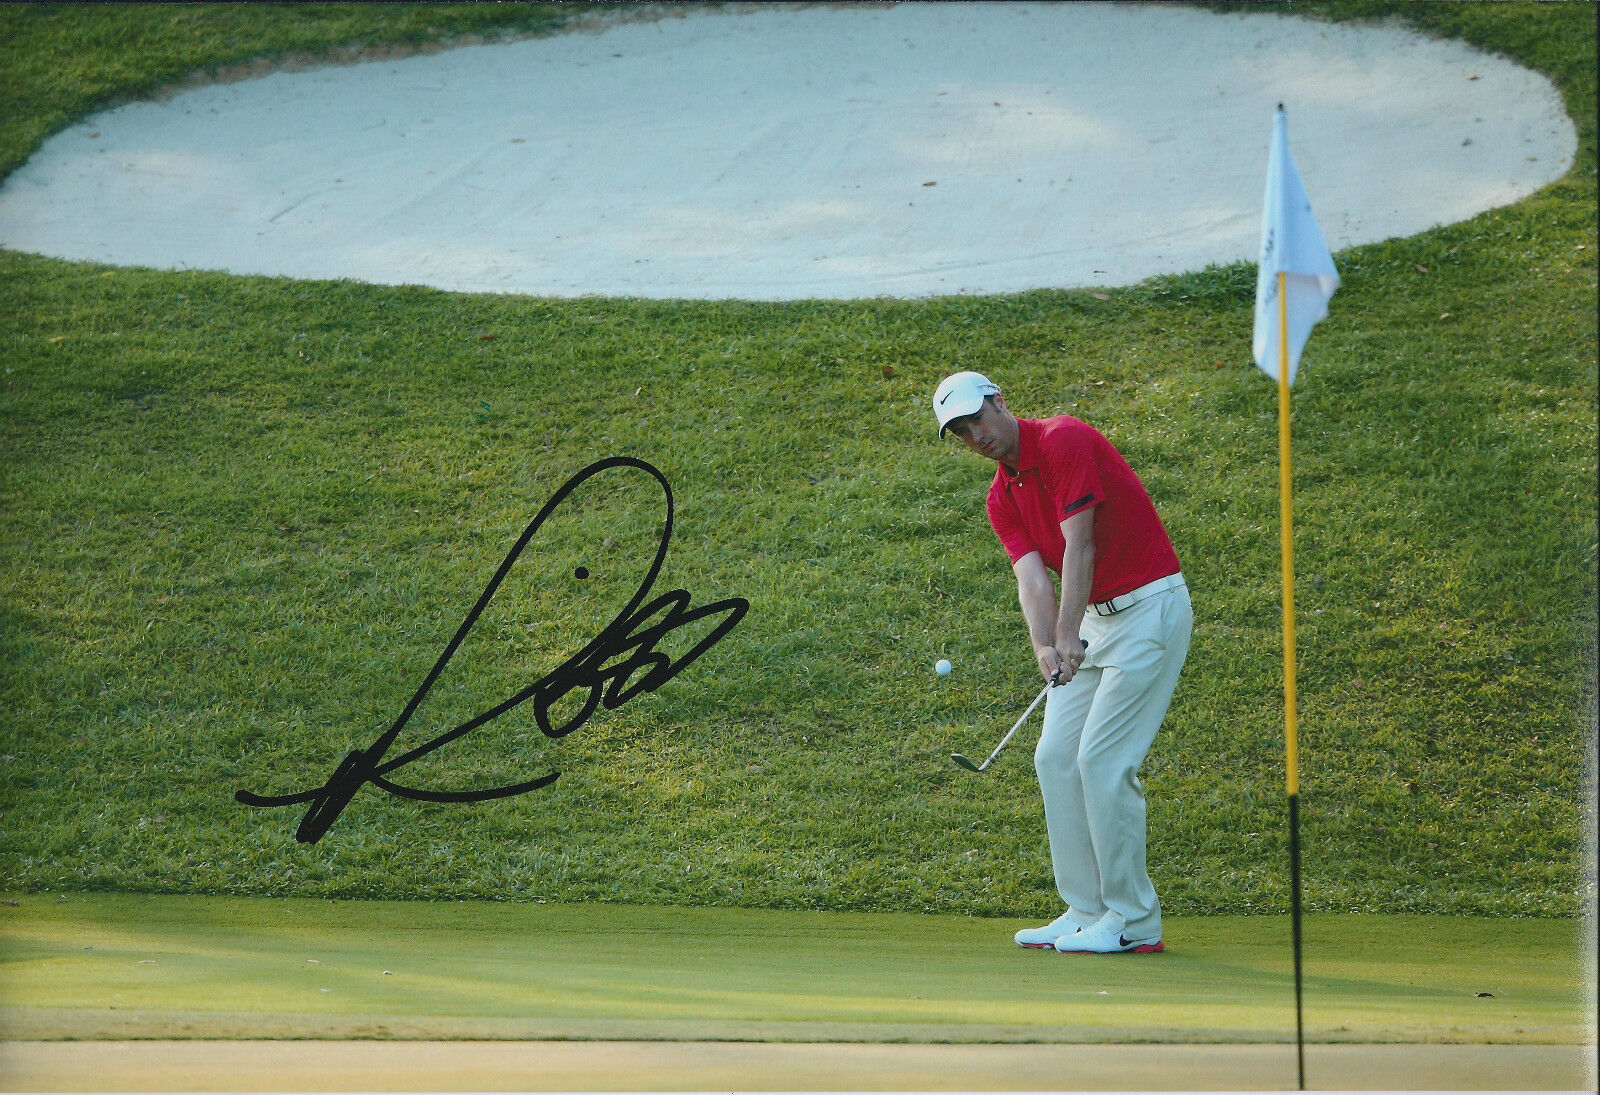 Ross FISHER SIGNED12x8 Photo Poster painting AFTAL COA Autograph European Tour Winner AUTHENTIC